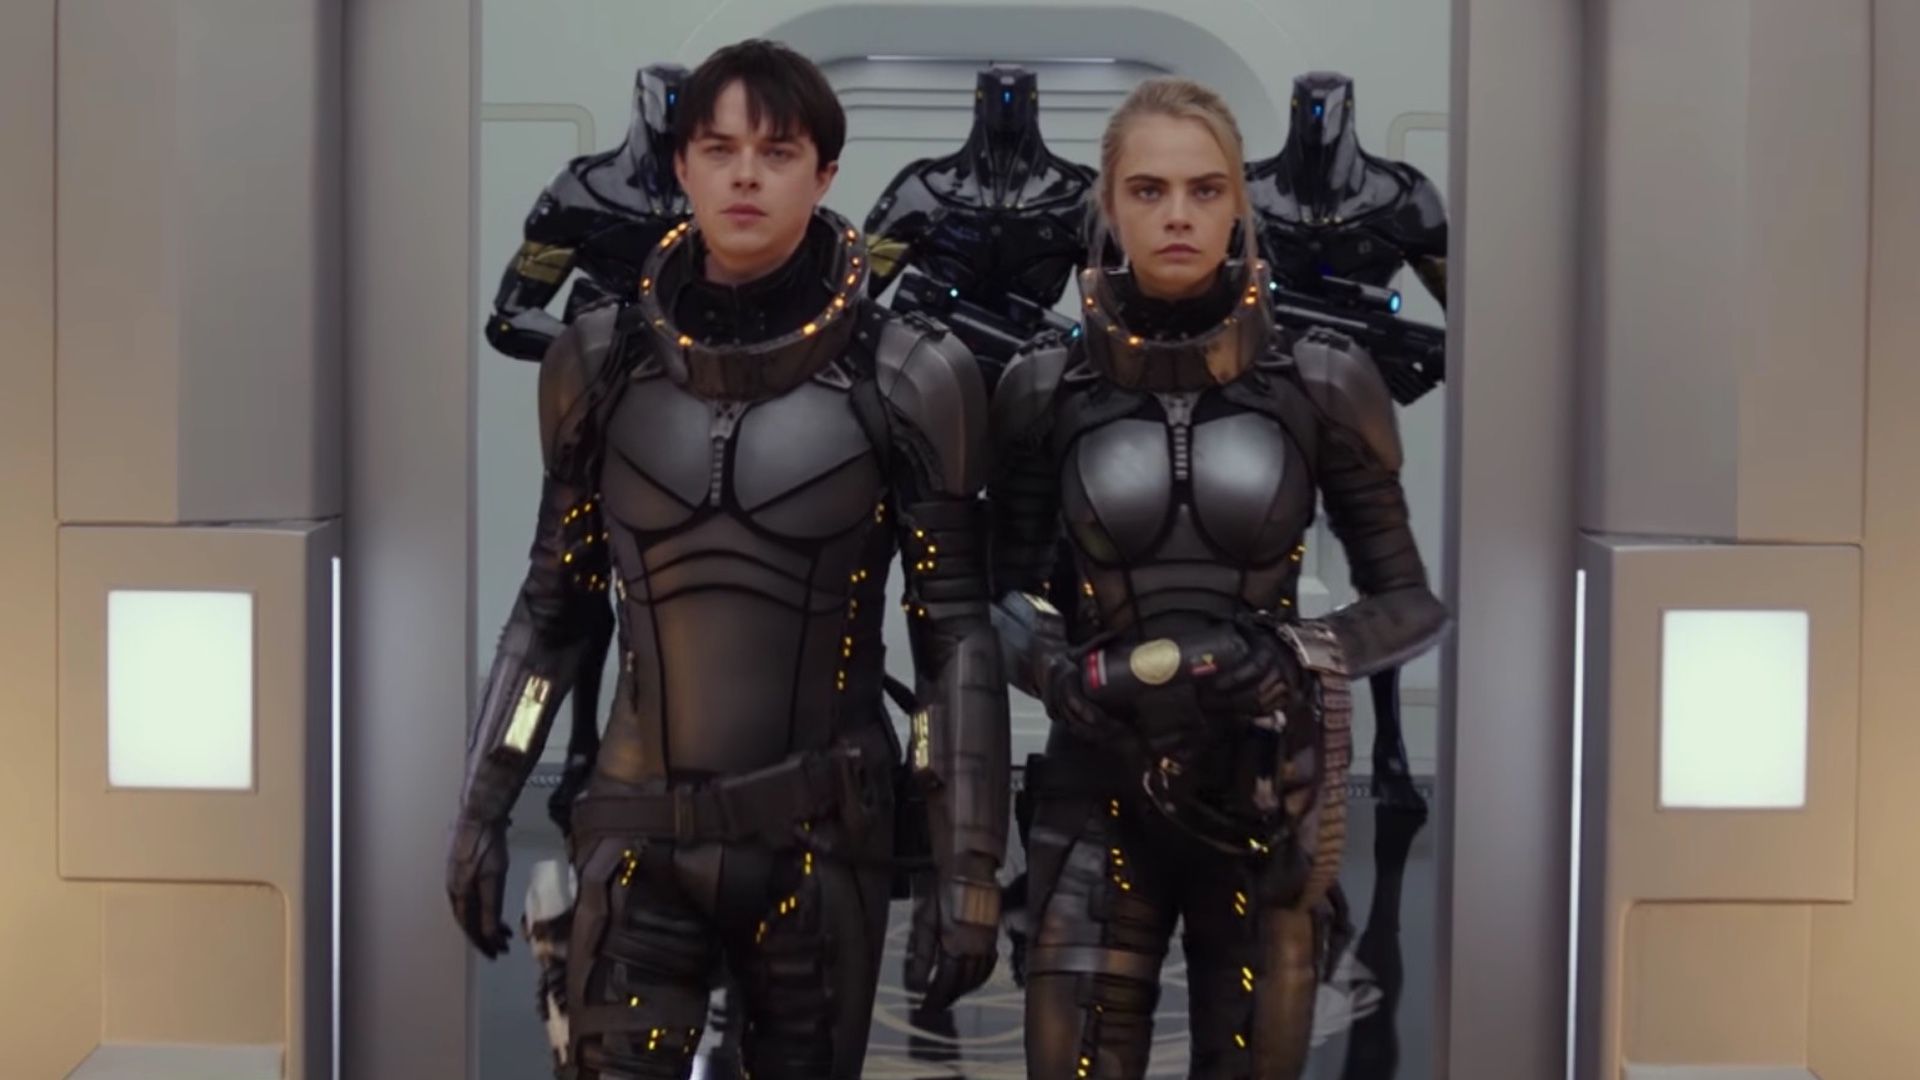 New TV Spot For VALERIAN AND THE CITY OF A THOUSAND PLANETS Show